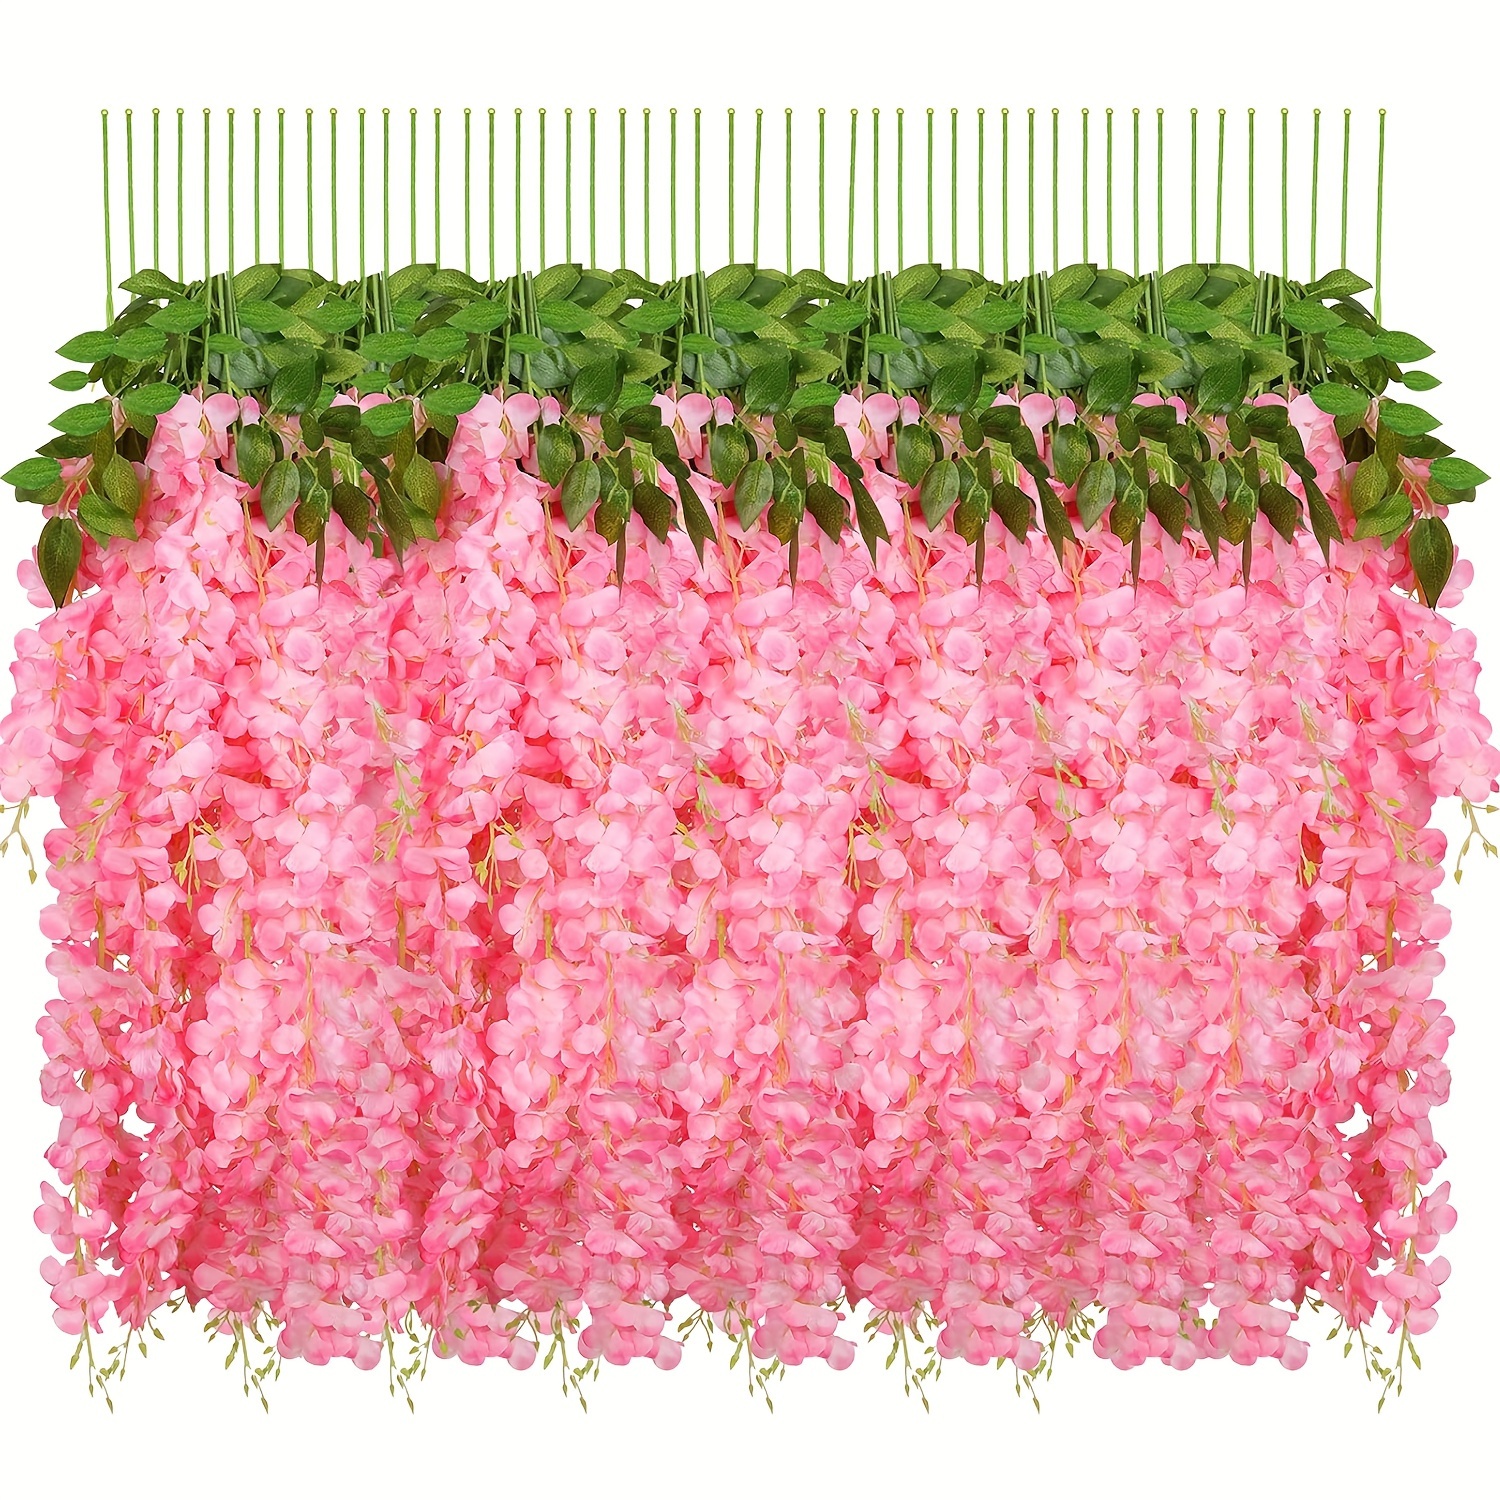 

12pack, Artificial Wisteria Hanging Flowers, Fake Hanging Flowers Pink Wisteria Vine Ratta Hanging Garland Silk Flowers Outdoor Indoor Wedding Arch Backdrop Party Room Wall Decor